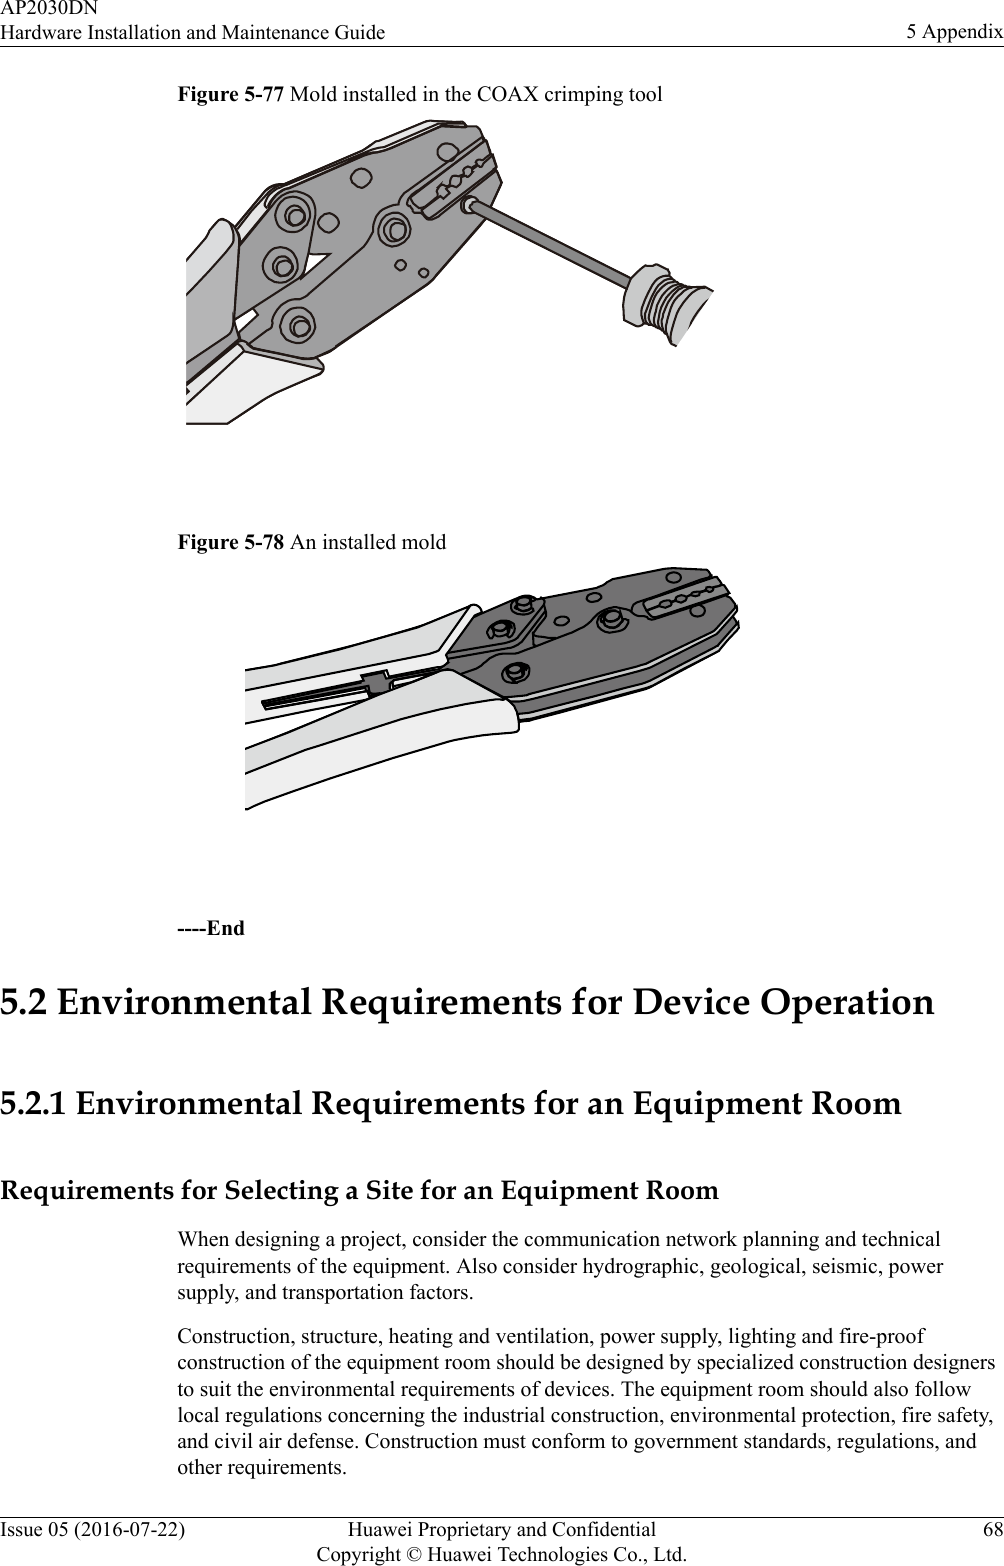 Figure 5-77 Mold installed in the COAX crimping tool Figure 5-78 An installed mold ----End5.2 Environmental Requirements for Device Operation5.2.1 Environmental Requirements for an Equipment RoomRequirements for Selecting a Site for an Equipment RoomWhen designing a project, consider the communication network planning and technicalrequirements of the equipment. Also consider hydrographic, geological, seismic, powersupply, and transportation factors.Construction, structure, heating and ventilation, power supply, lighting and fire-proofconstruction of the equipment room should be designed by specialized construction designersto suit the environmental requirements of devices. The equipment room should also followlocal regulations concerning the industrial construction, environmental protection, fire safety,and civil air defense. Construction must conform to government standards, regulations, andother requirements.AP2030DNHardware Installation and Maintenance Guide 5 AppendixIssue 05 (2016-07-22) Huawei Proprietary and ConfidentialCopyright © Huawei Technologies Co., Ltd.68